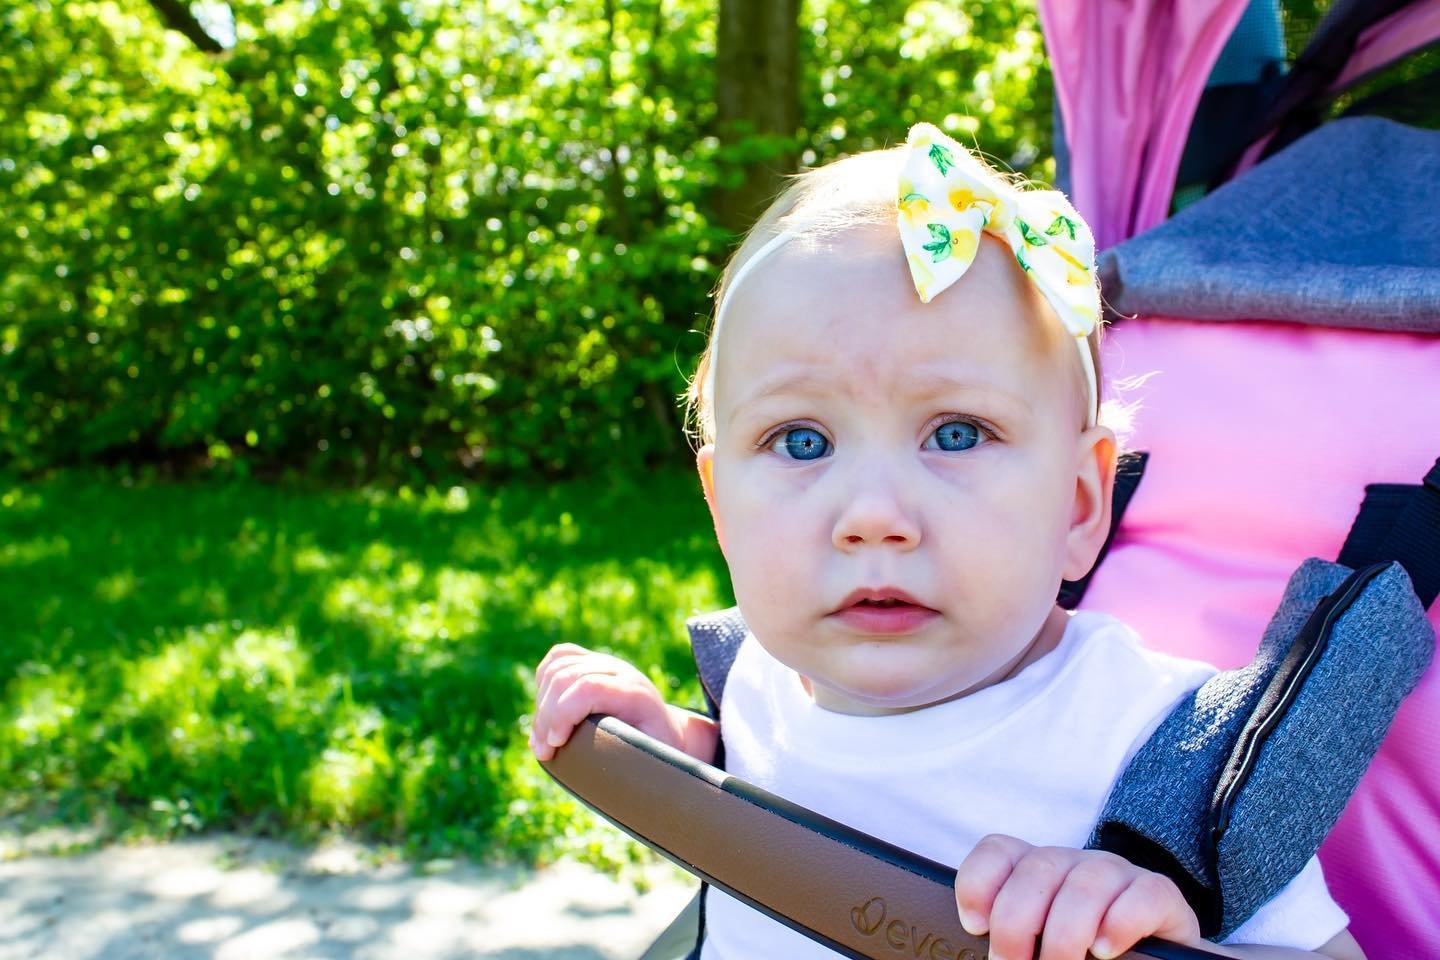 Doesn&rsquo;t this little cutie look adorable in these baby bow headbands?? 🥲🥳 Find the perfect summery patterns now on my website! ☺️

Photo cred: @foofysphotography 

#babybow #girlmama #babymodel #babyheadband #babygirlstyle #babygirlfashion